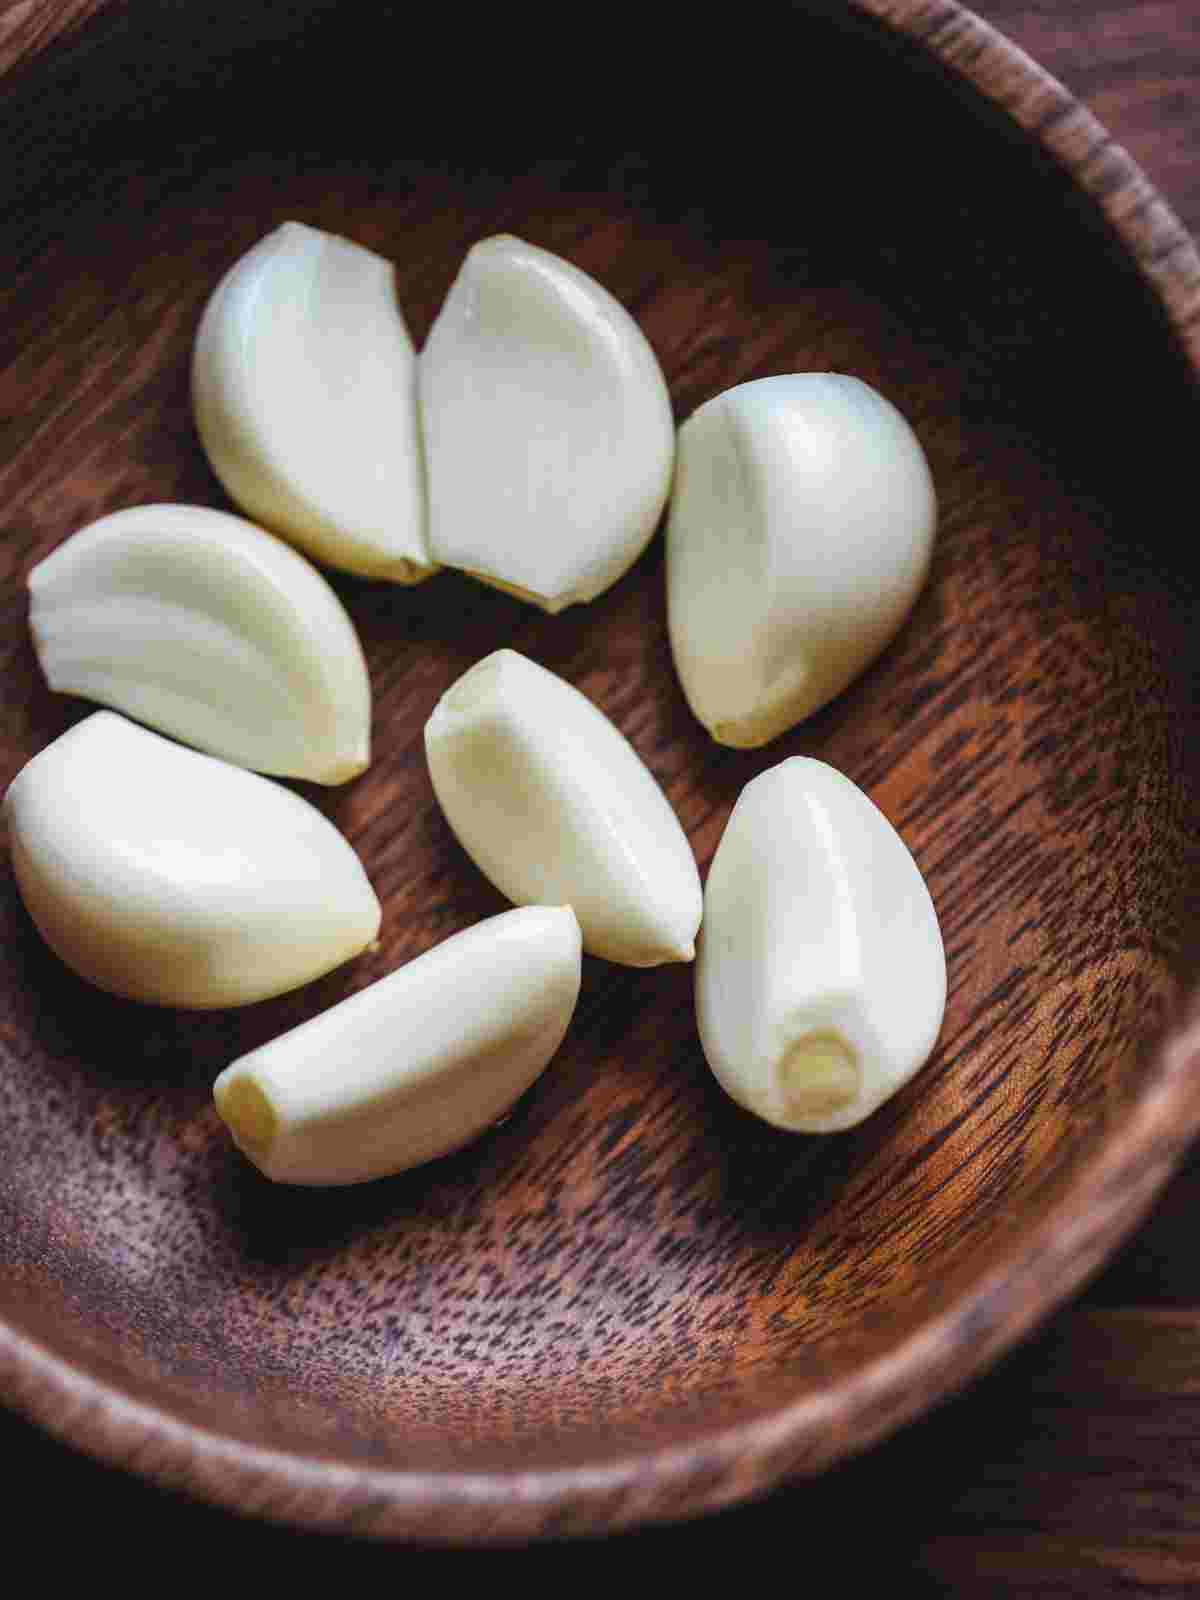 How to Peel Garlic: 8 Easy and Fast Ways to Peel Garlic